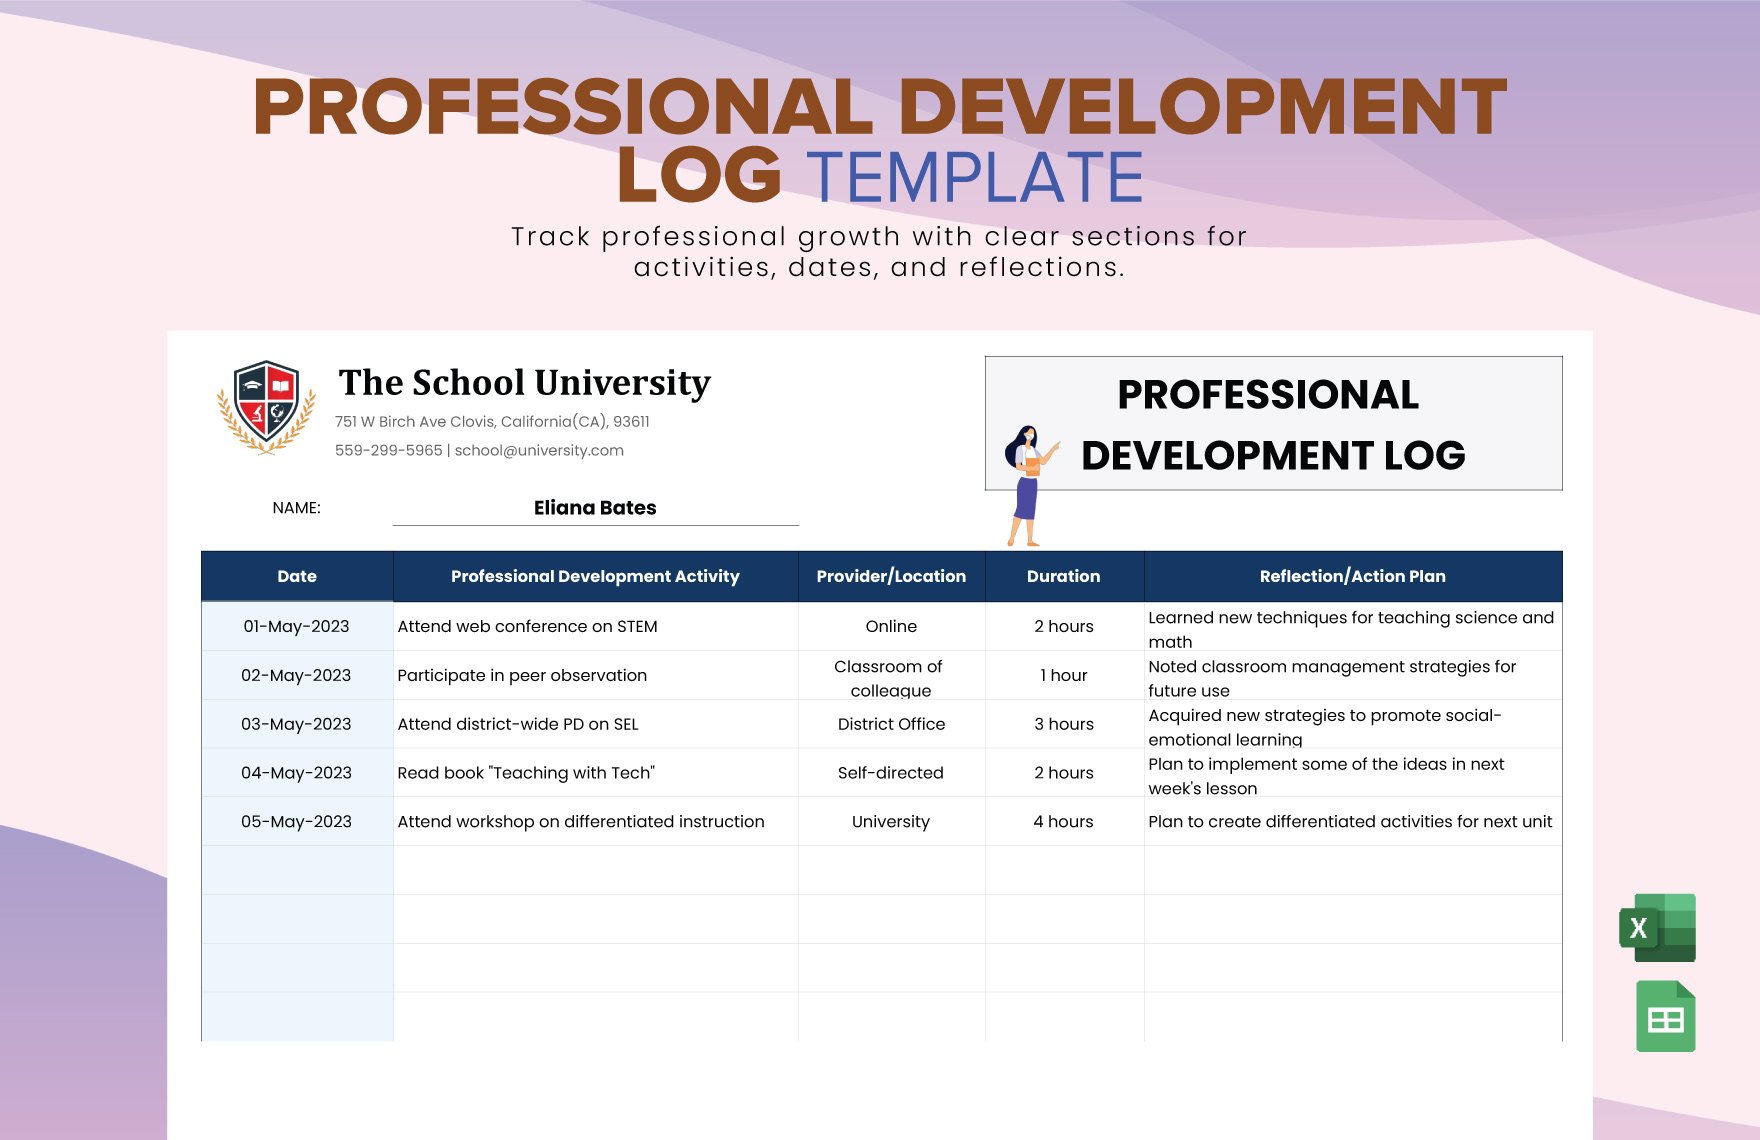 Professional Development Log Template in Excel, Google Sheets